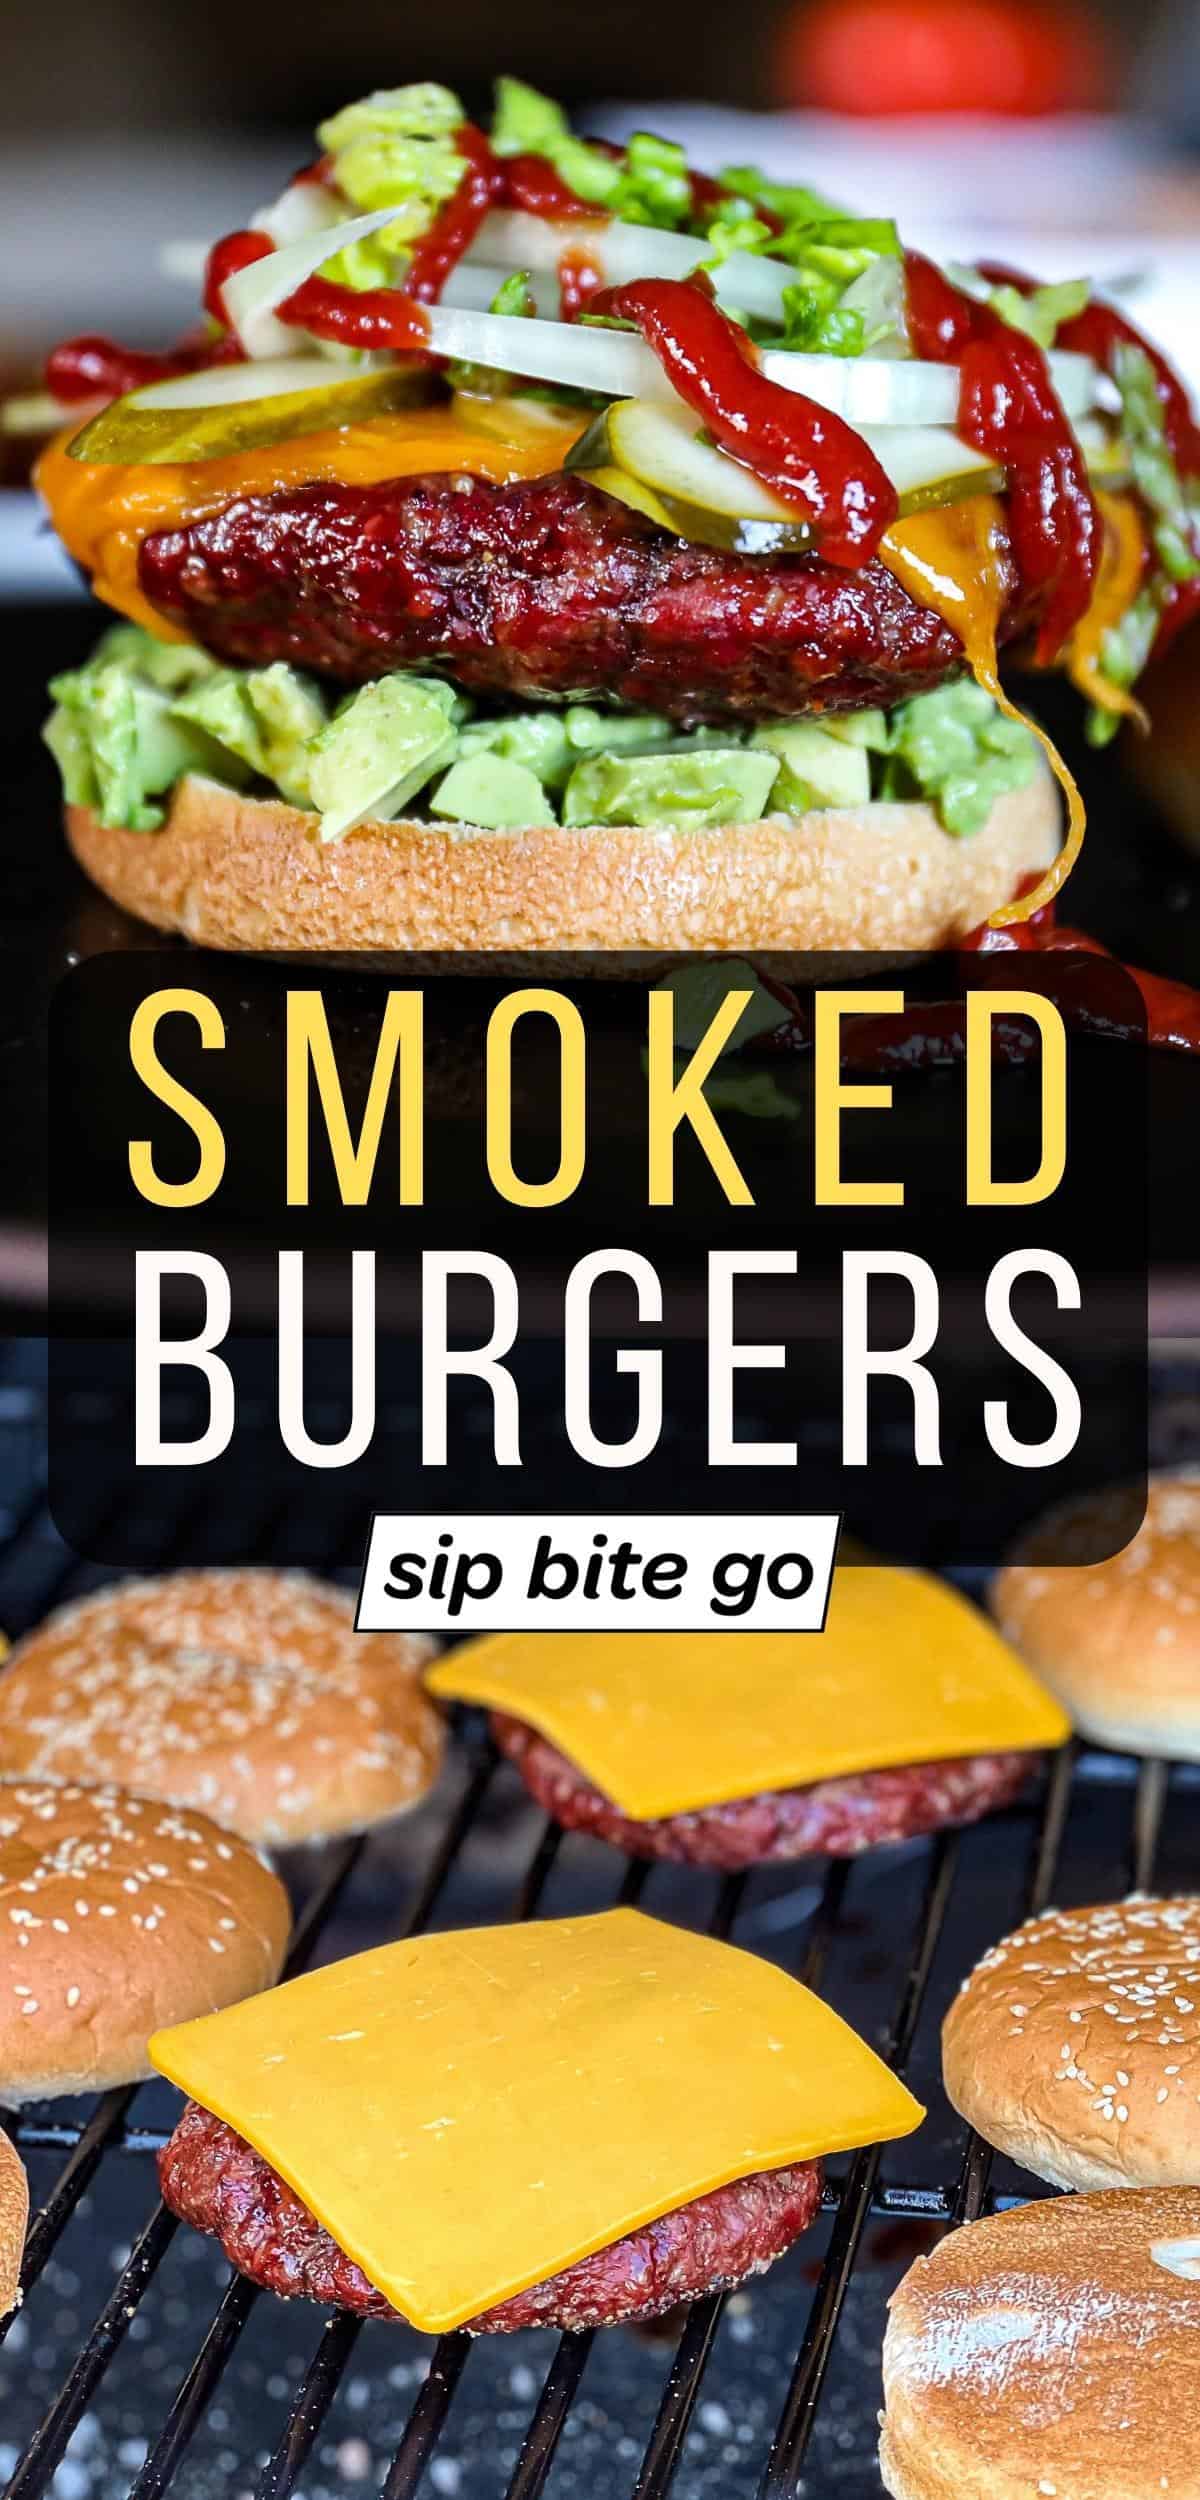 Traeger Smoked Burgers Recipe images with cheese on hamburgers and text overlay